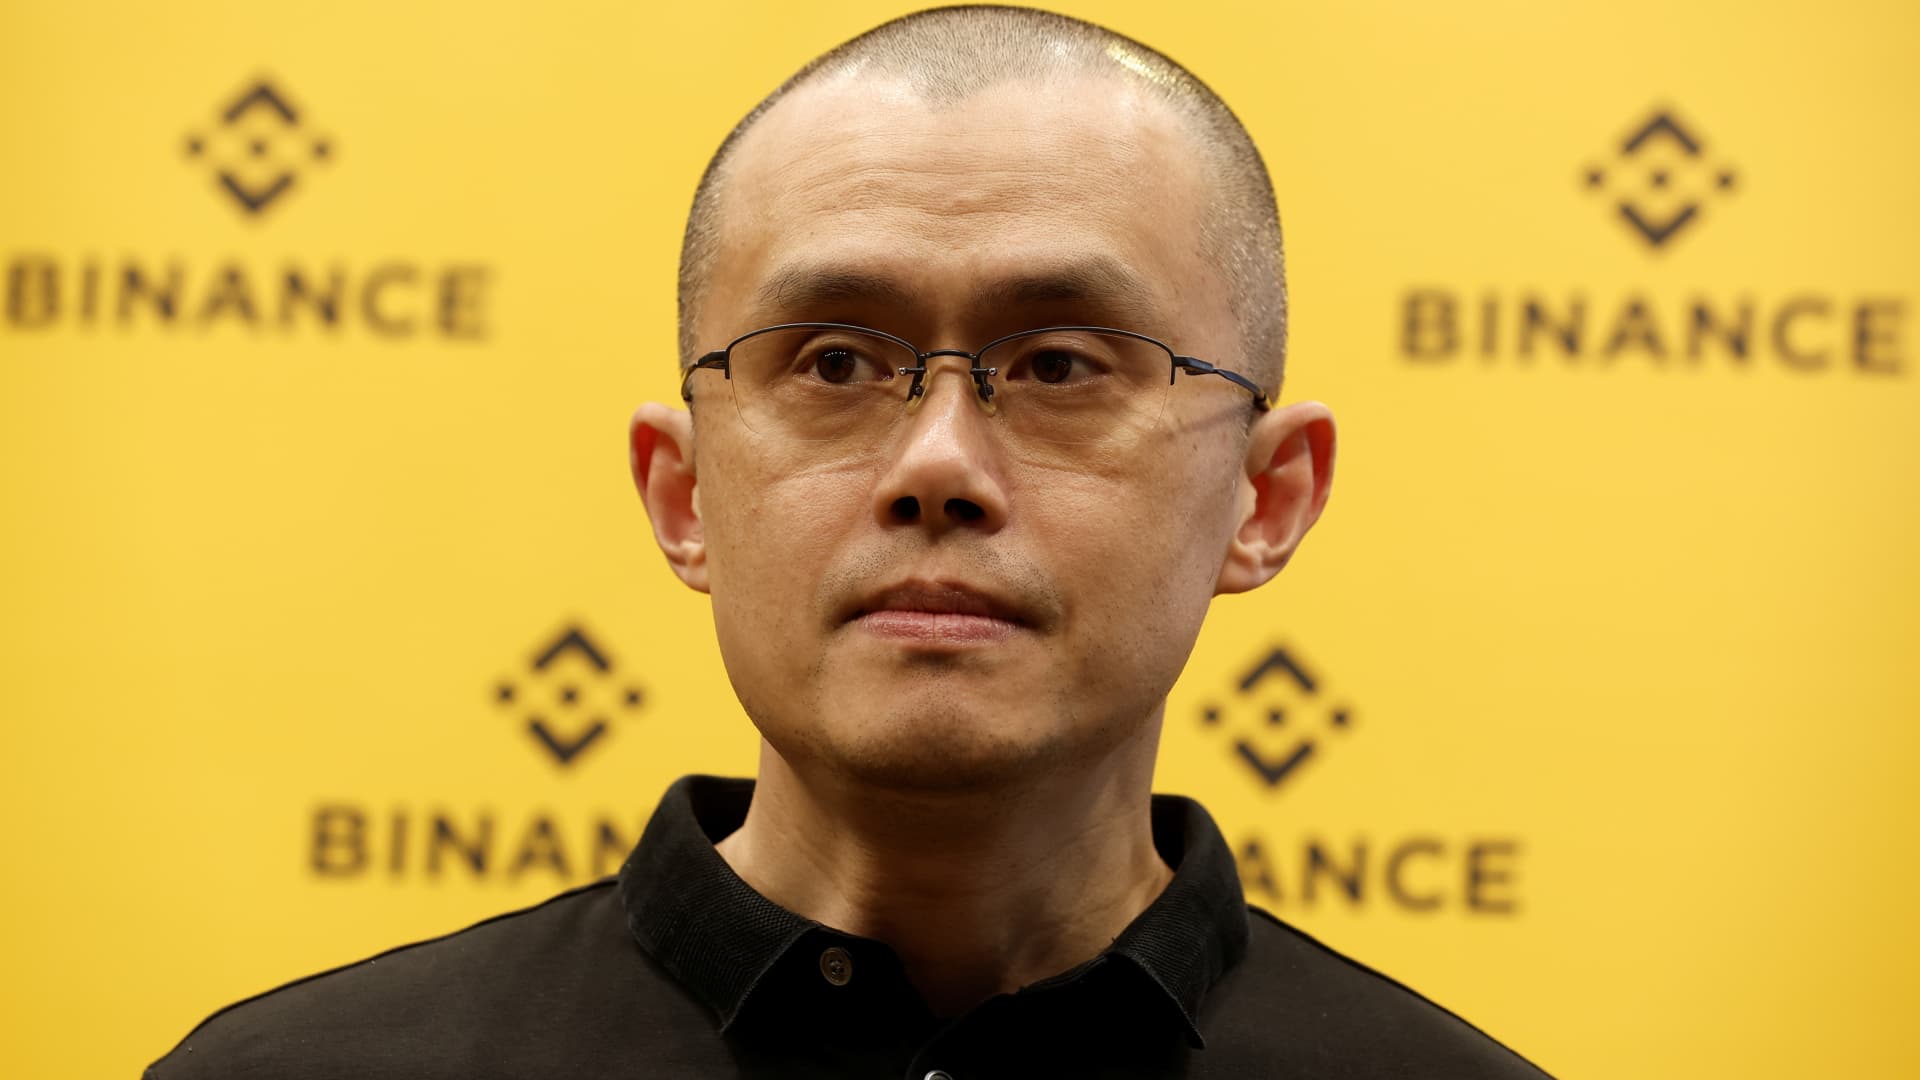 Binance founder Changpeng Zhao ordered by judge to stay in U.S. ahead of prison sentencing